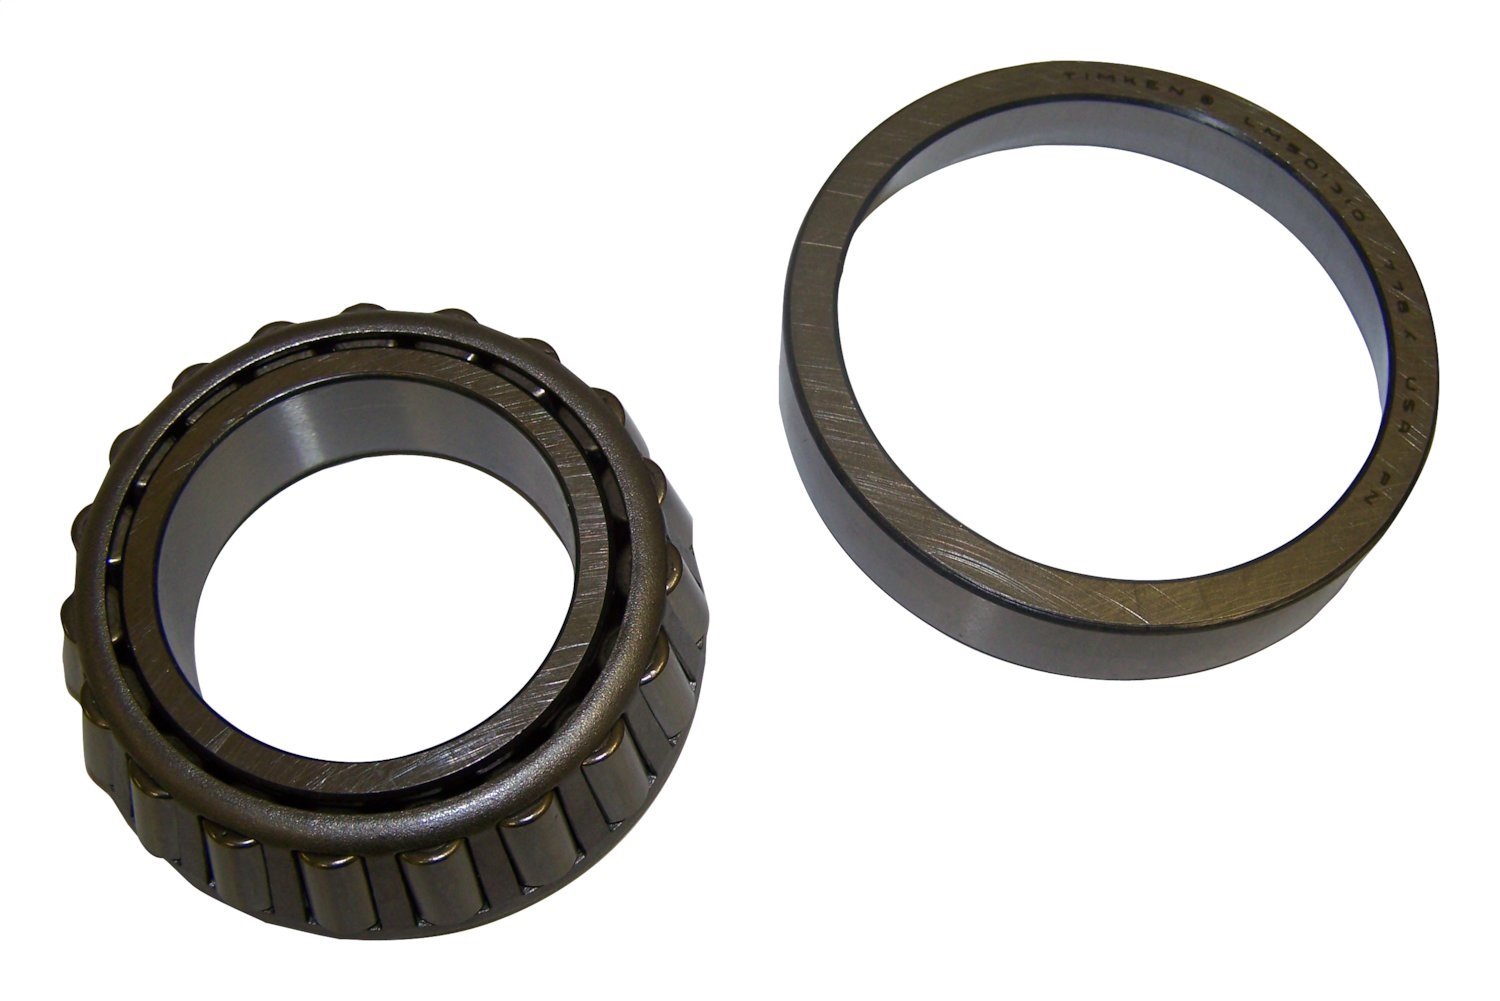 Axle Spindle Bearing